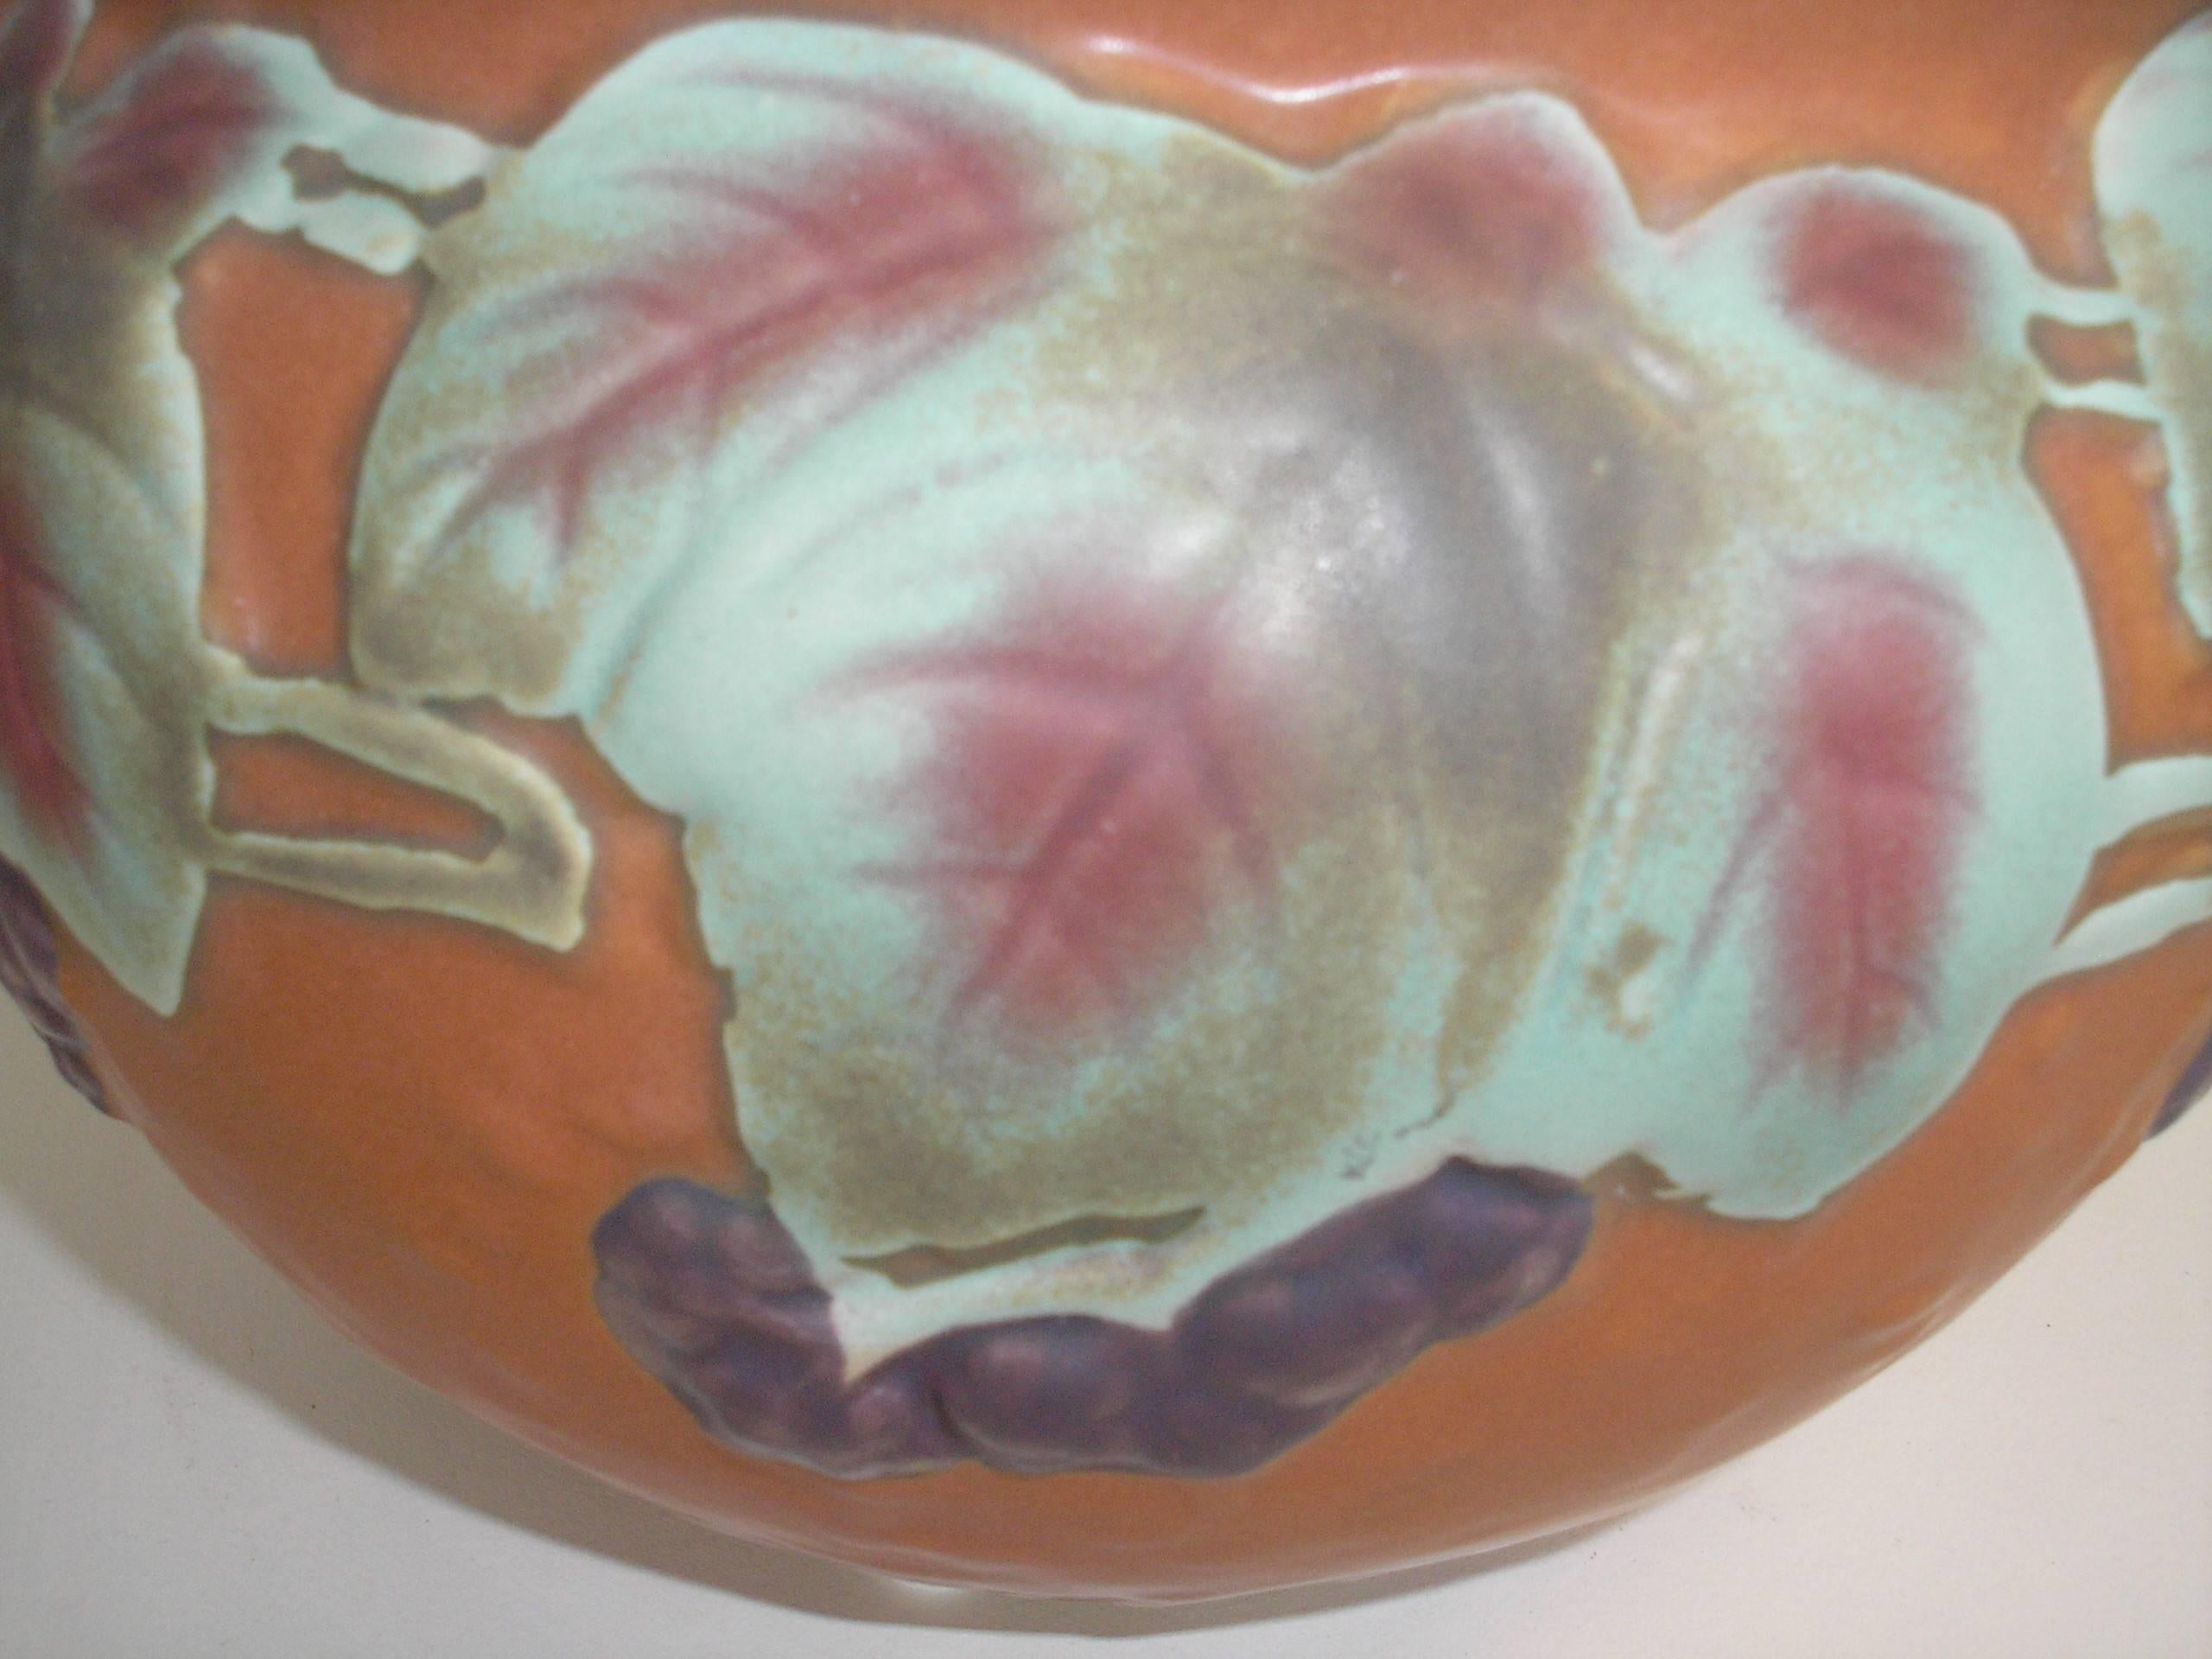 Roseville pottery bowl/urn with grape motif. Two small handles. Signed on the bottom, circa 1960. Excellent condition.